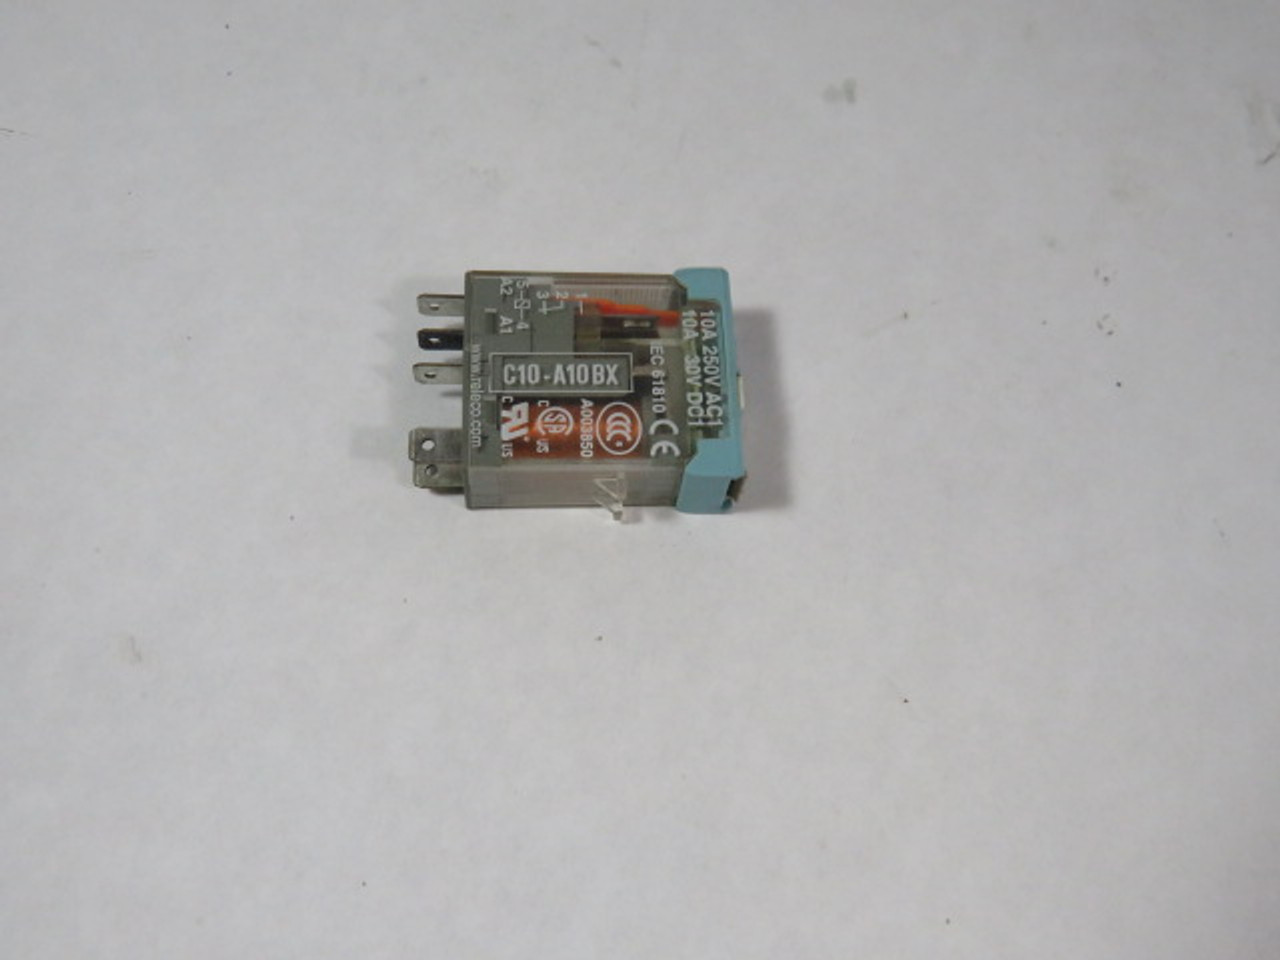 Releco C10-A10BX-ADC24V Bridge Rectifier Relay 24VAC/EDC 10A 5 PIN  USED